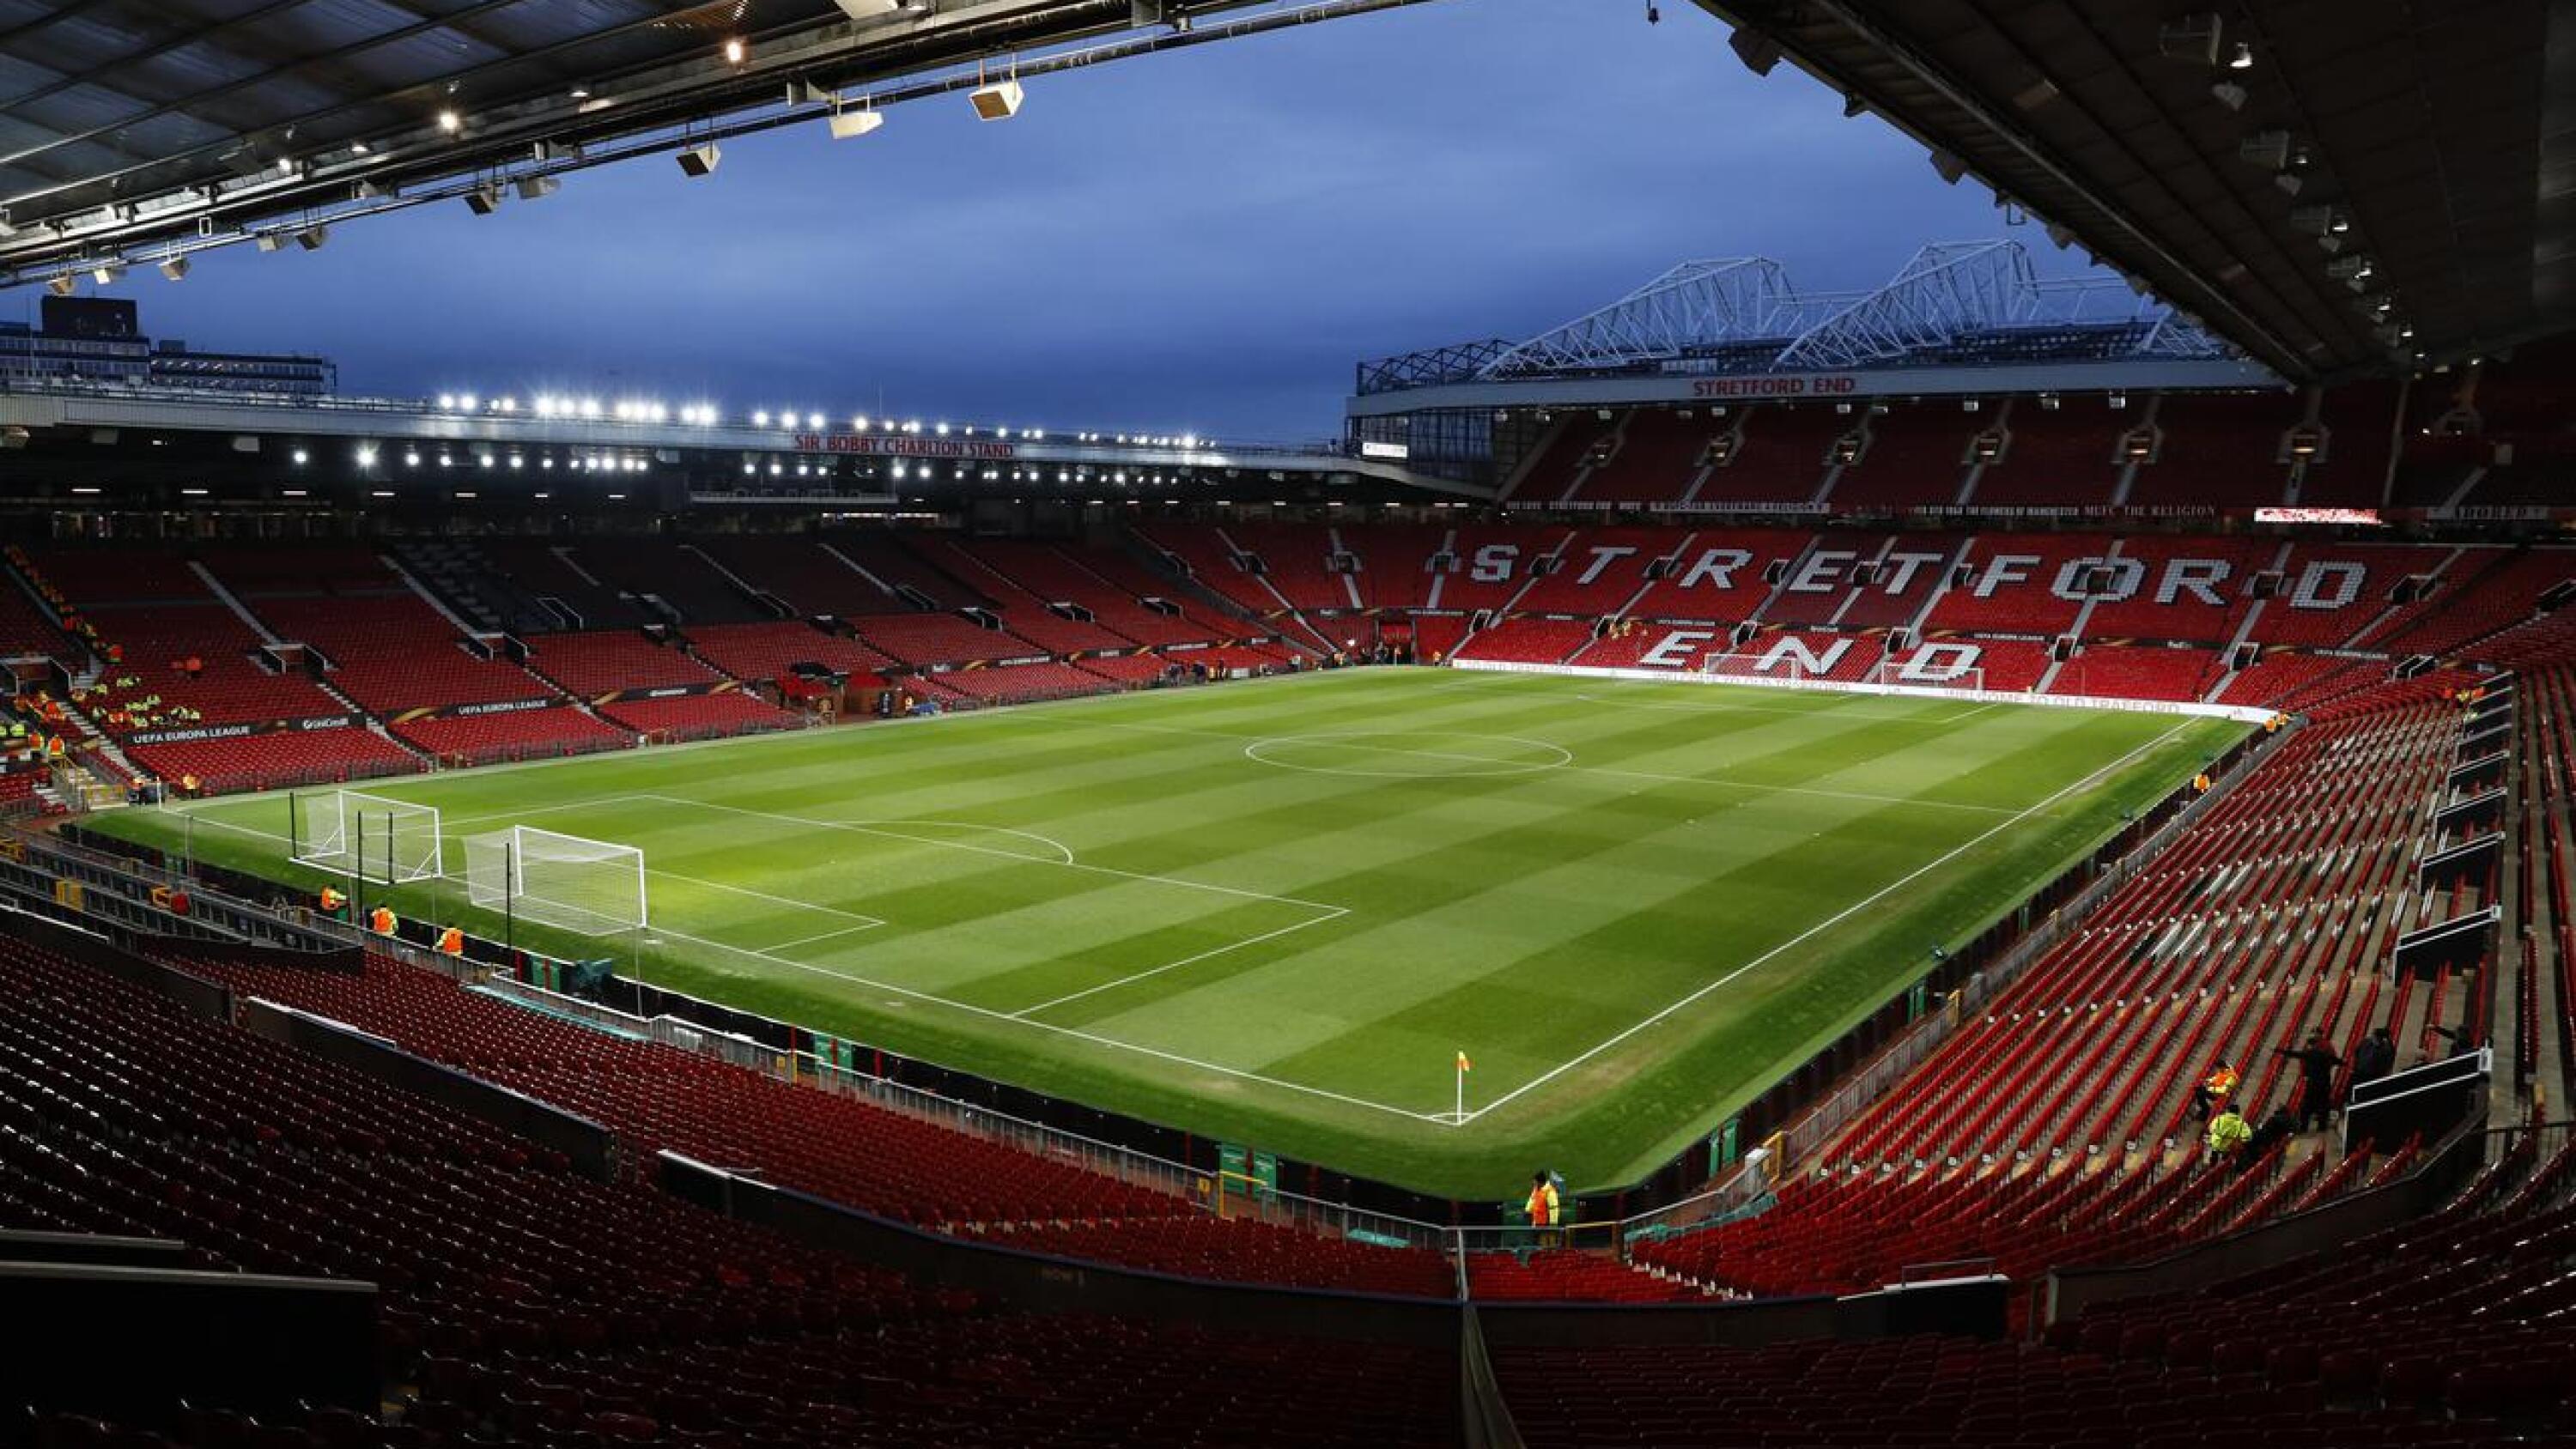 General view of Manchester United’s Old Trafford stadium